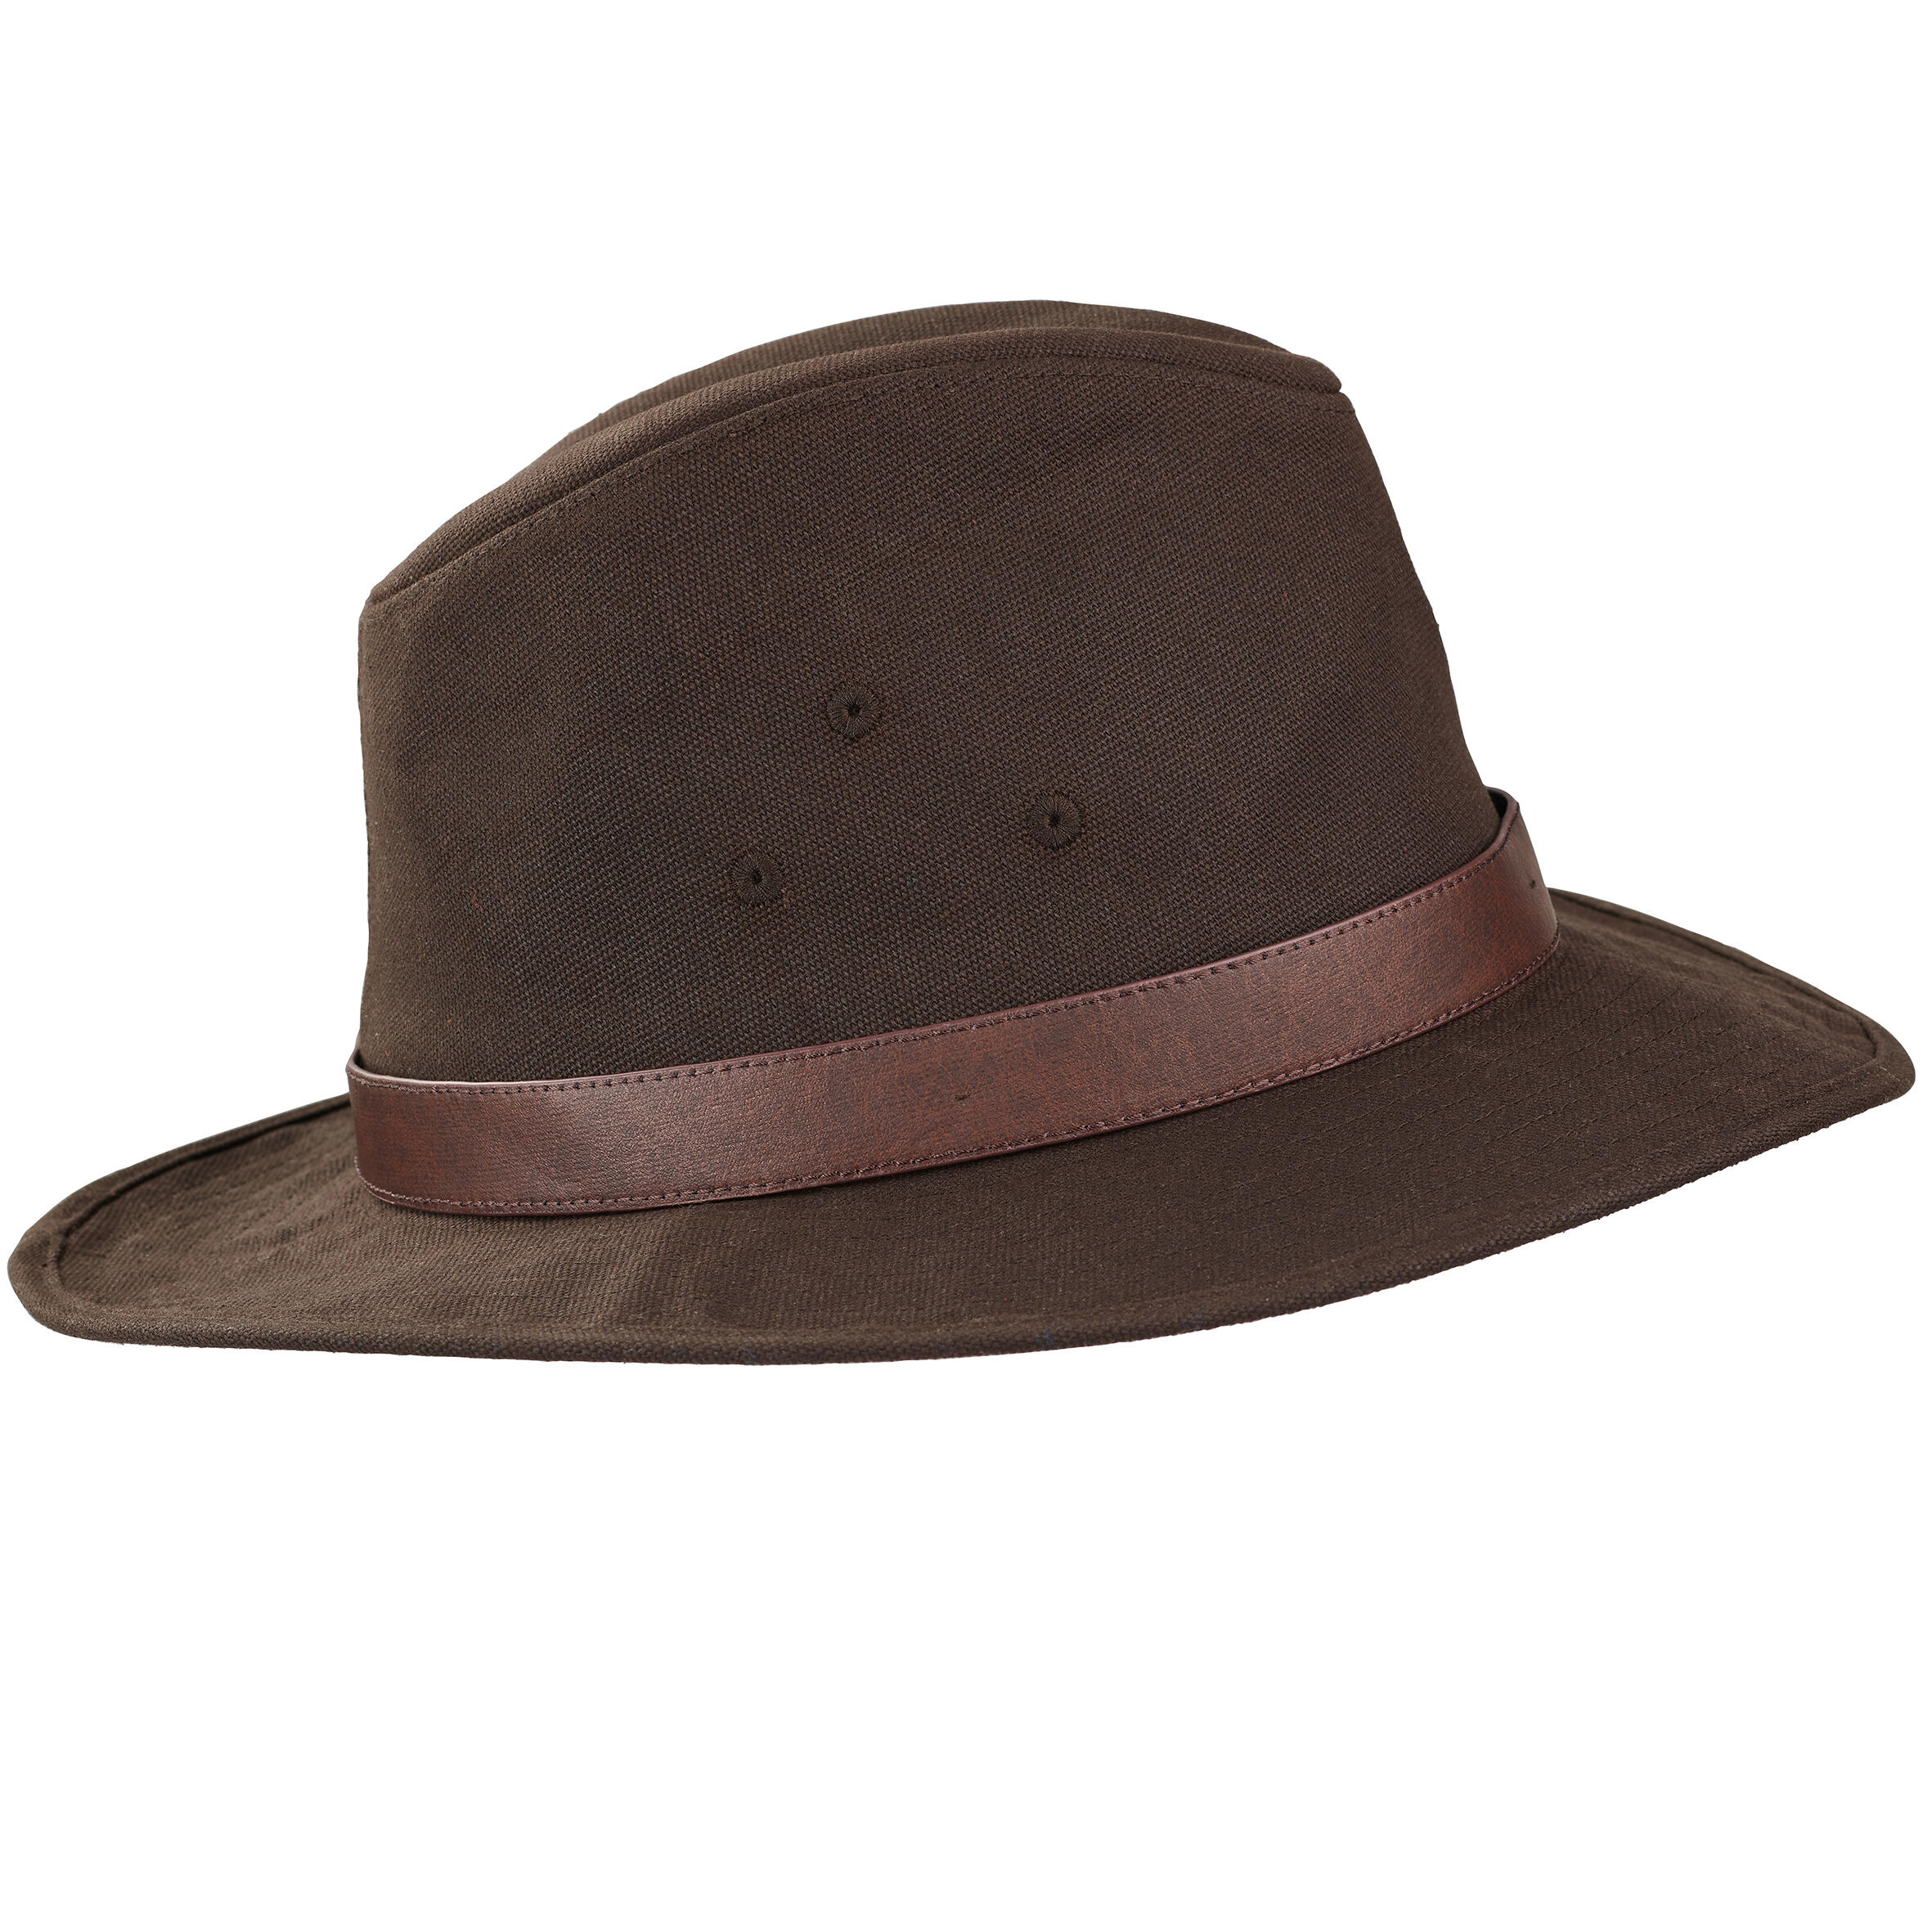 Hunting hat 540, durable and water-repellent 4/7